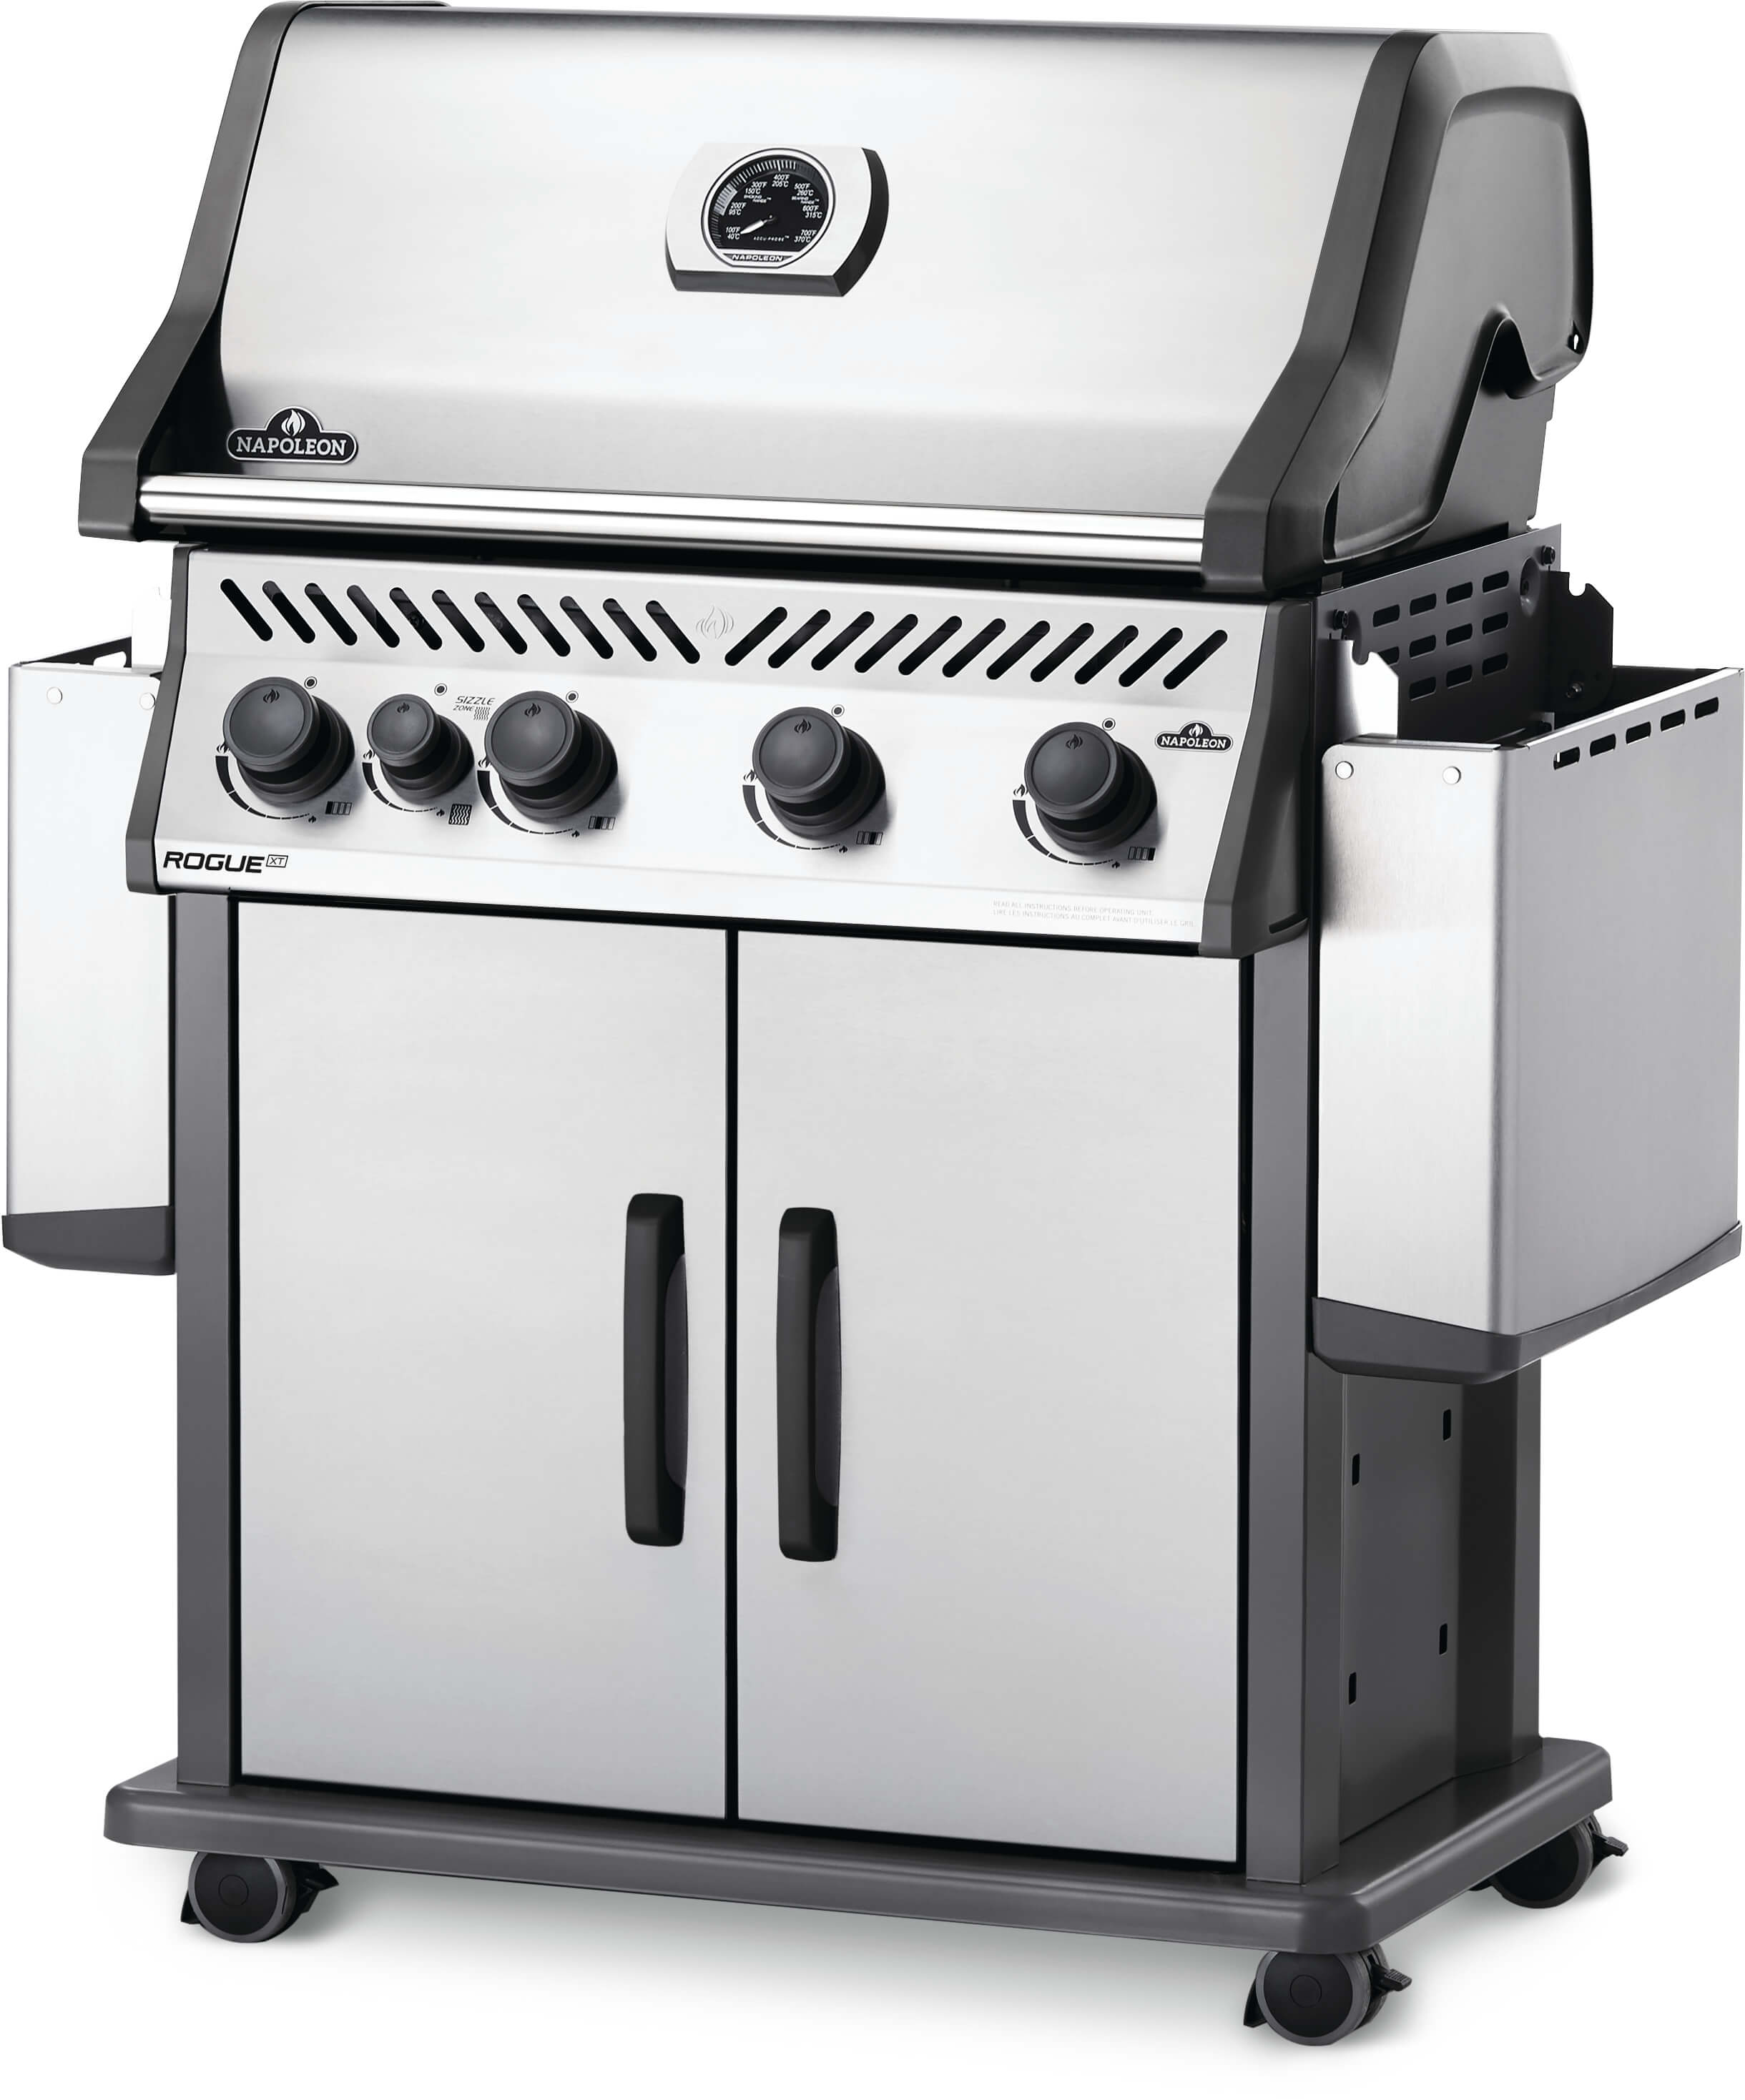 Rogue® XT 425 Natural Gas Grill with Infrared Side Burner, Stainless Steel - image 4 of 12